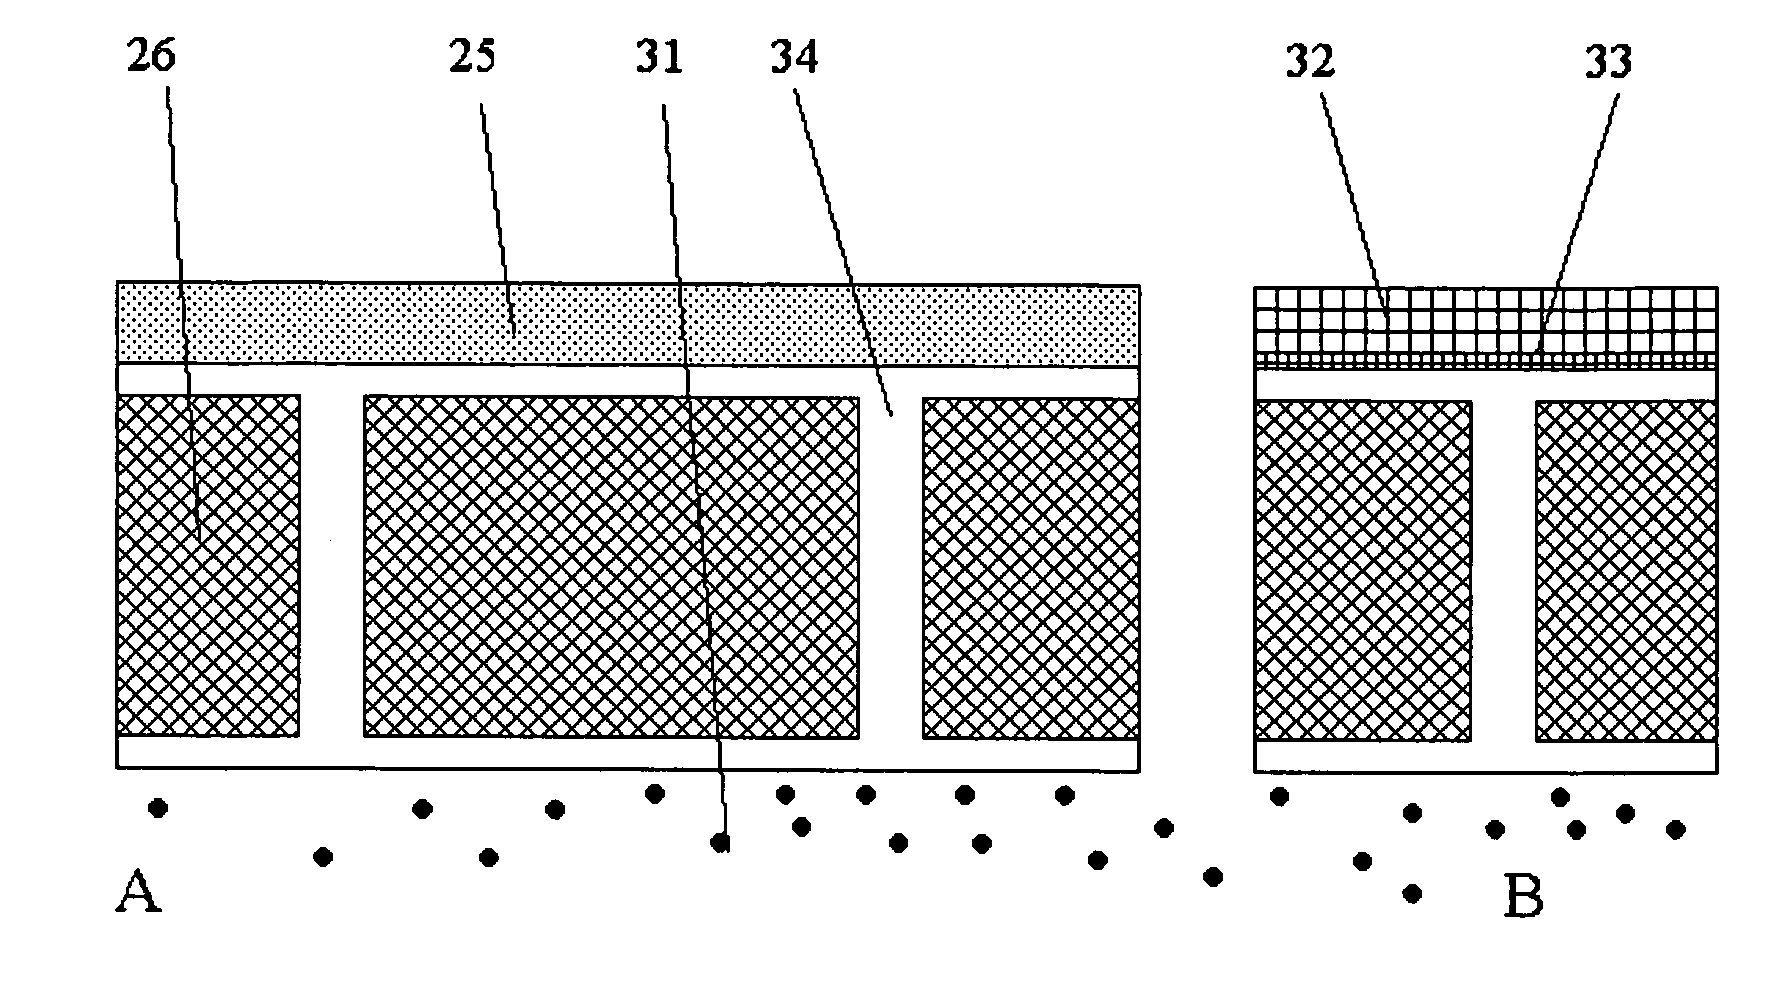 Enzyme sensor with a cover membrane layer covered by a hydrophilic polymer